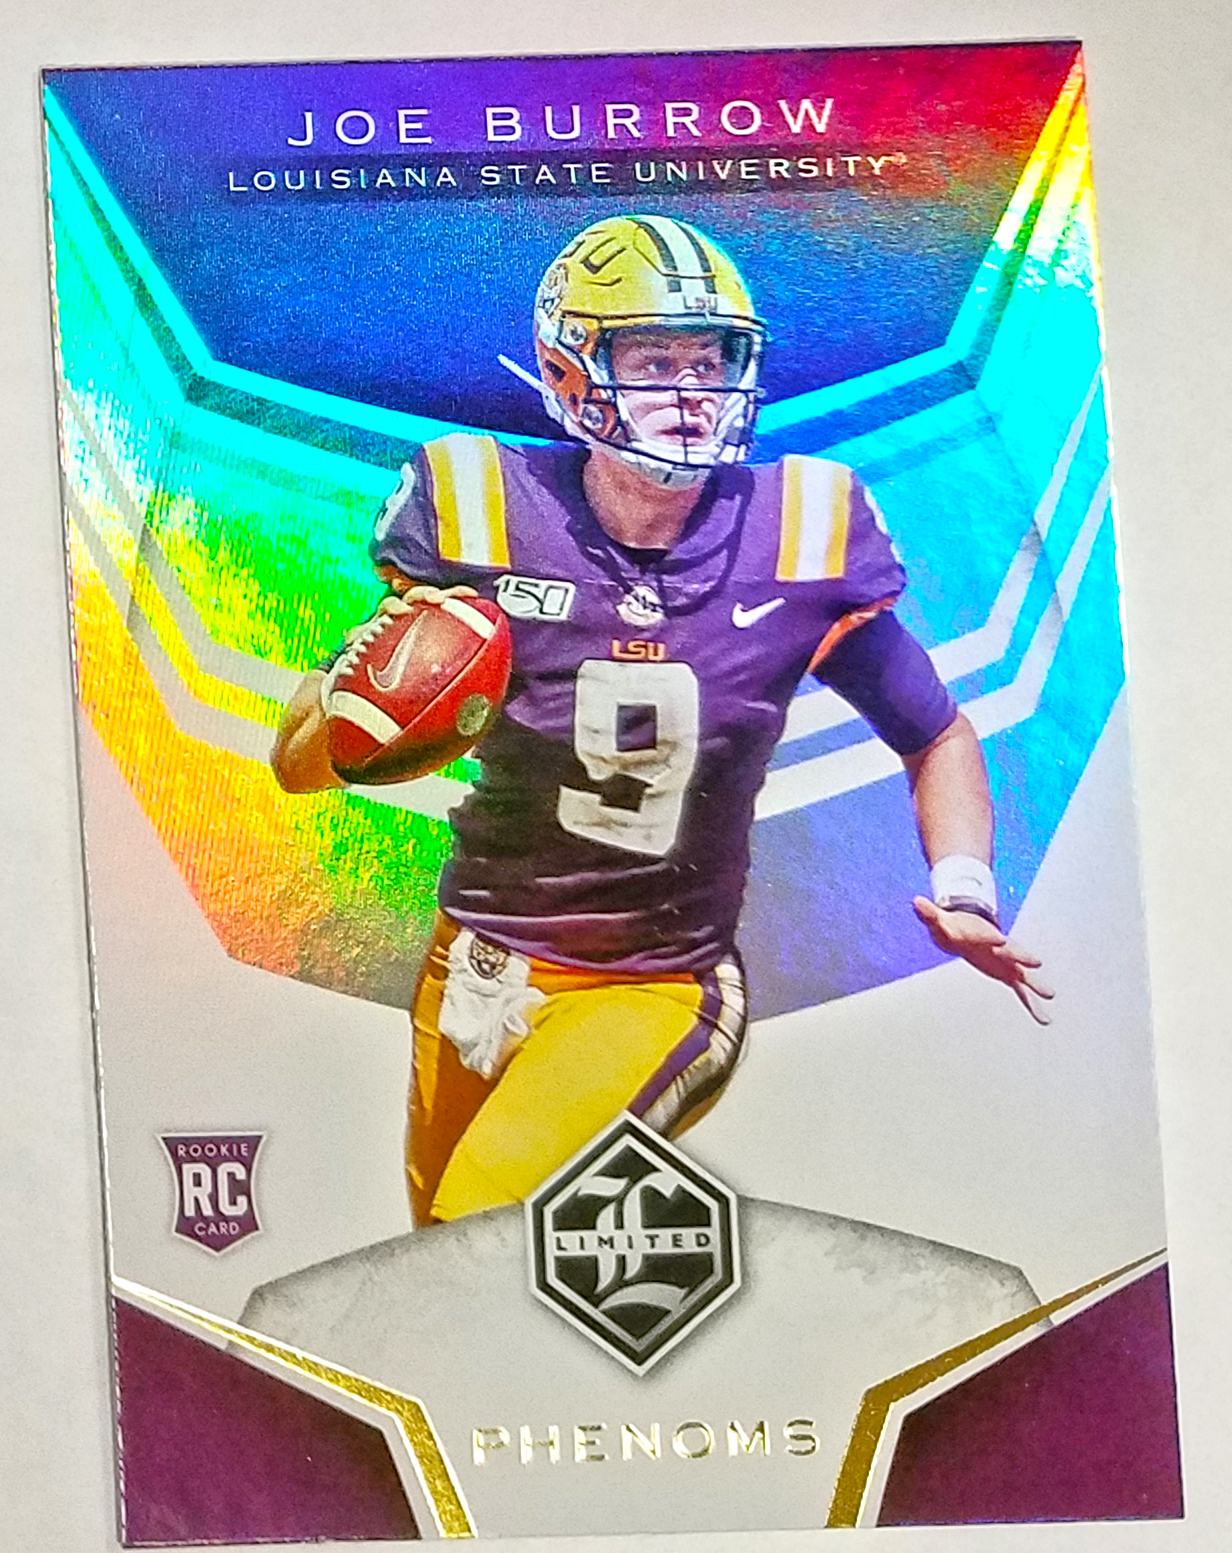 Panini America's New 2020 Chronicles Draft Picks Football Finds Exclusive  Retail Home at Target Stores – The Knight's Lance